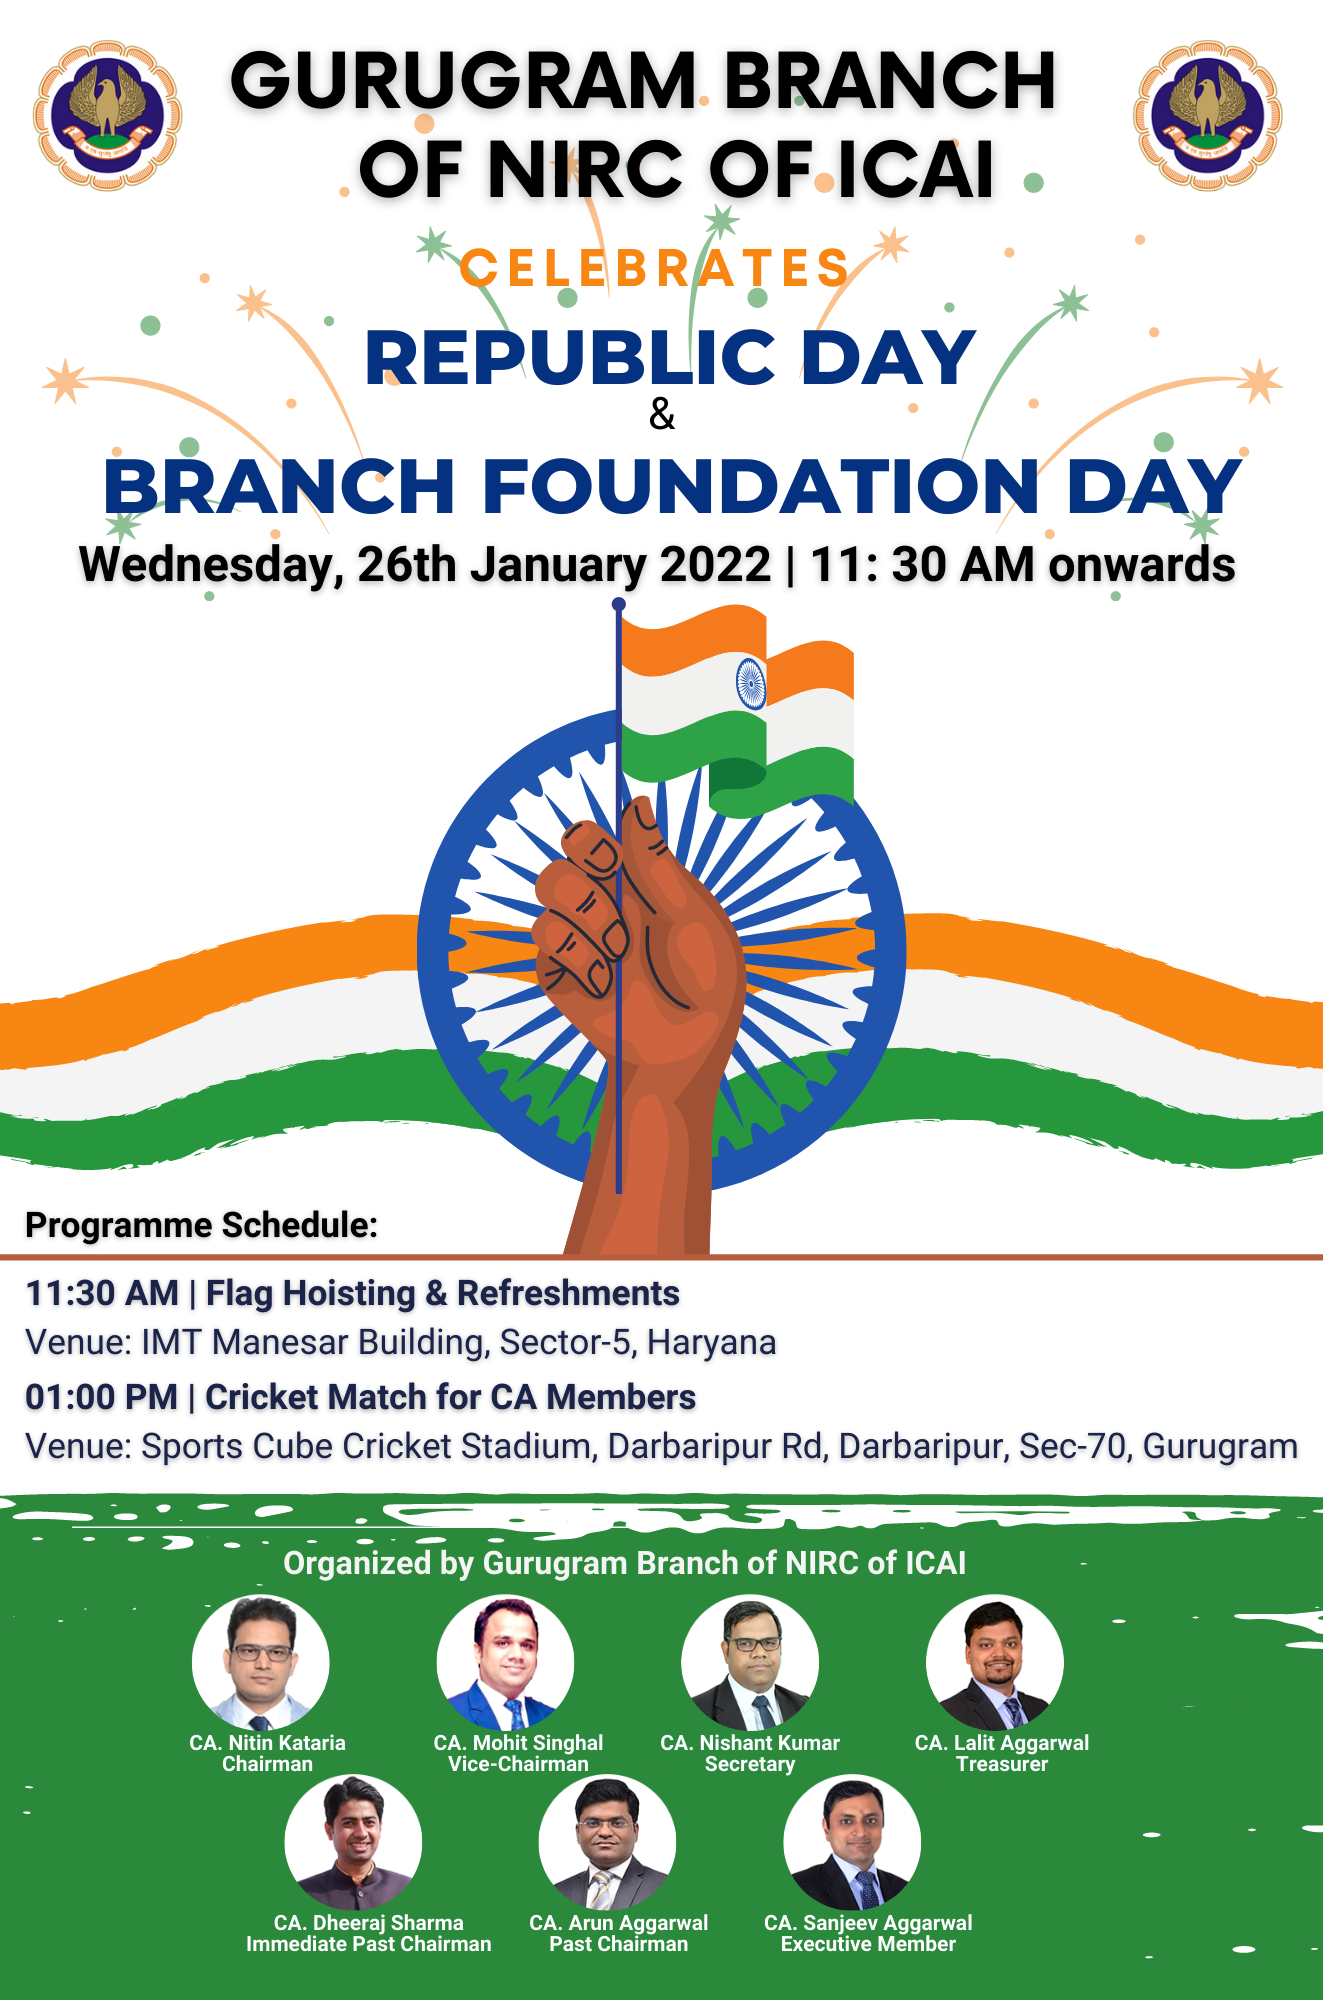 Celebration of 73rd Republic Day and 23rd Foundation Day of Gurugram Branch of NIRC of ICAI.